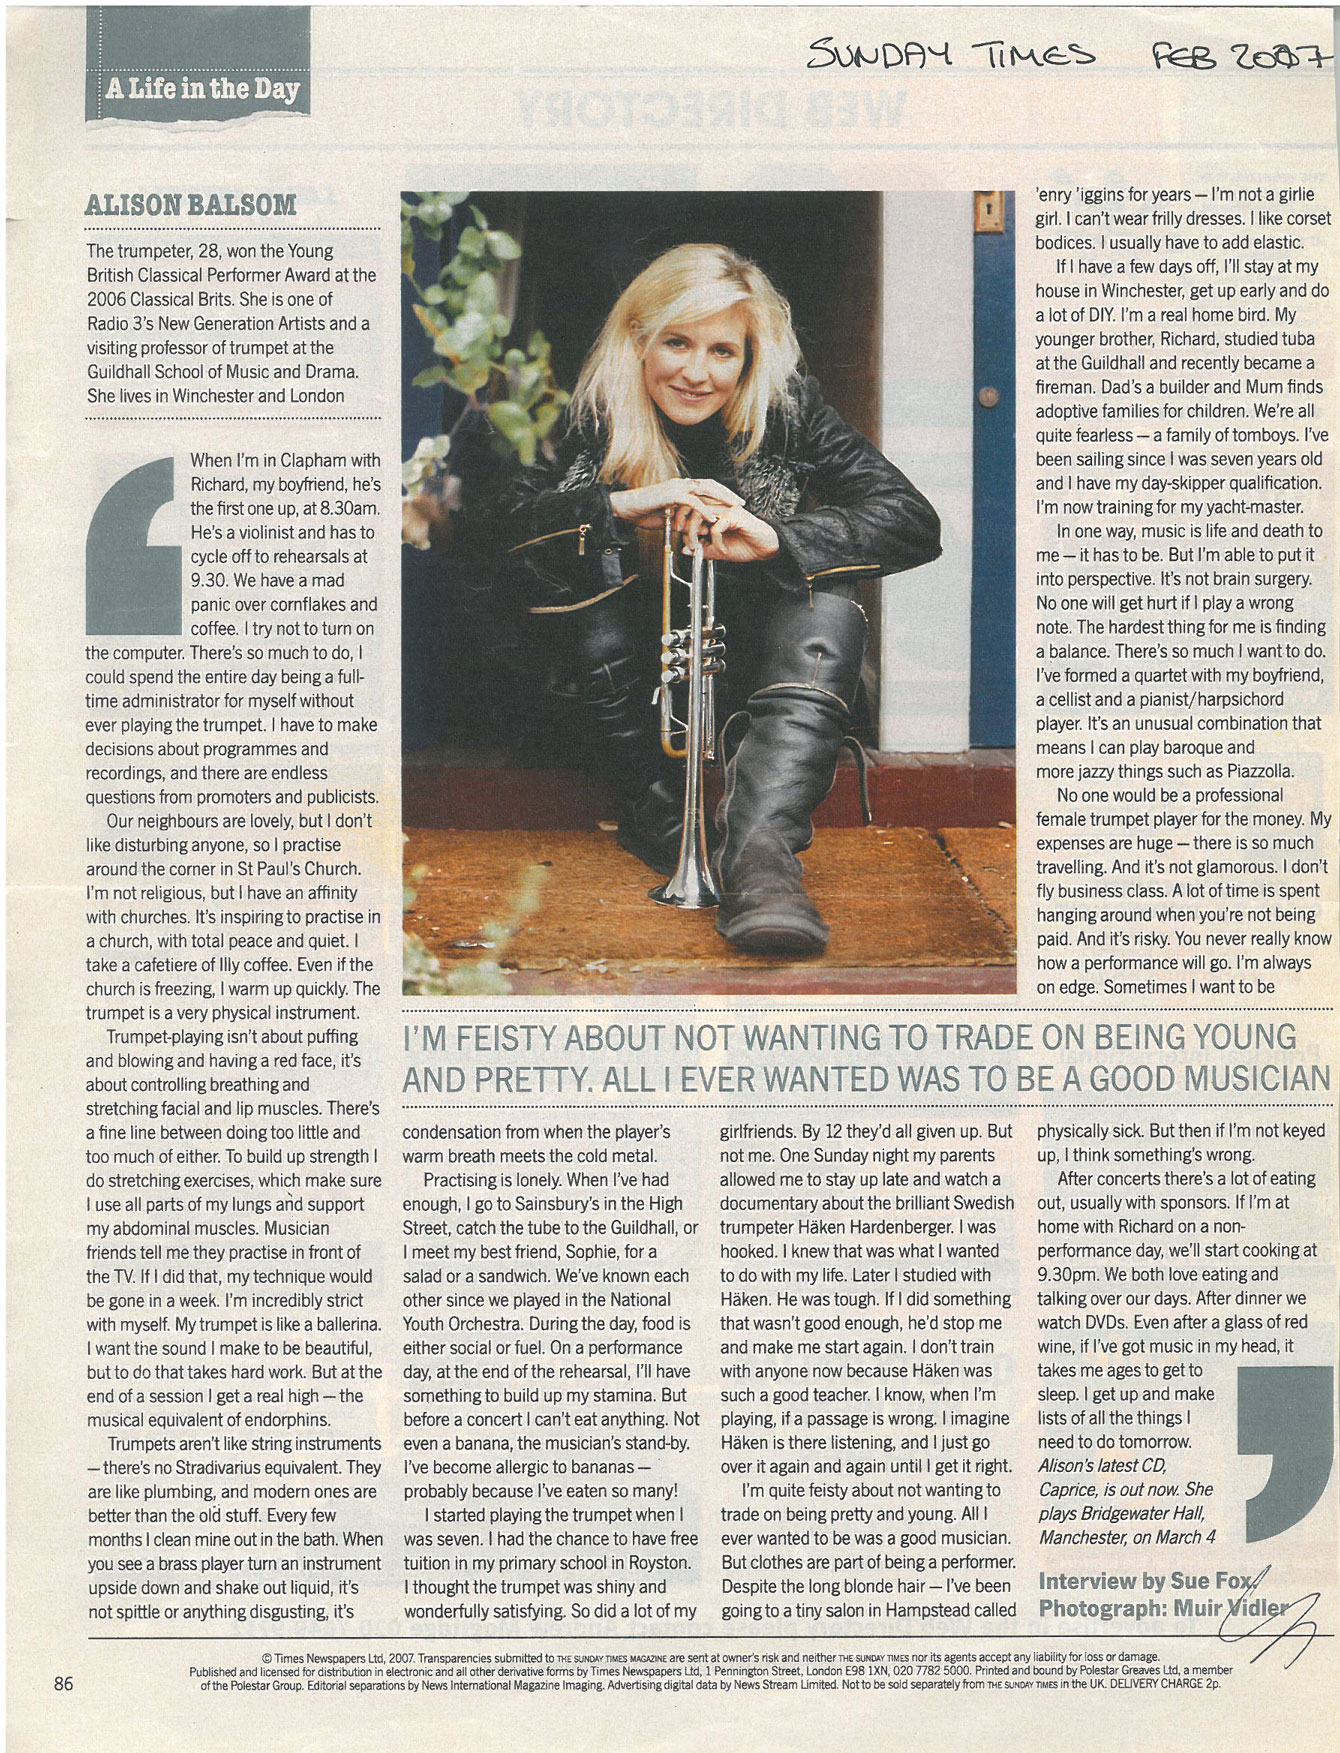 Article, 2007, Sunday Times